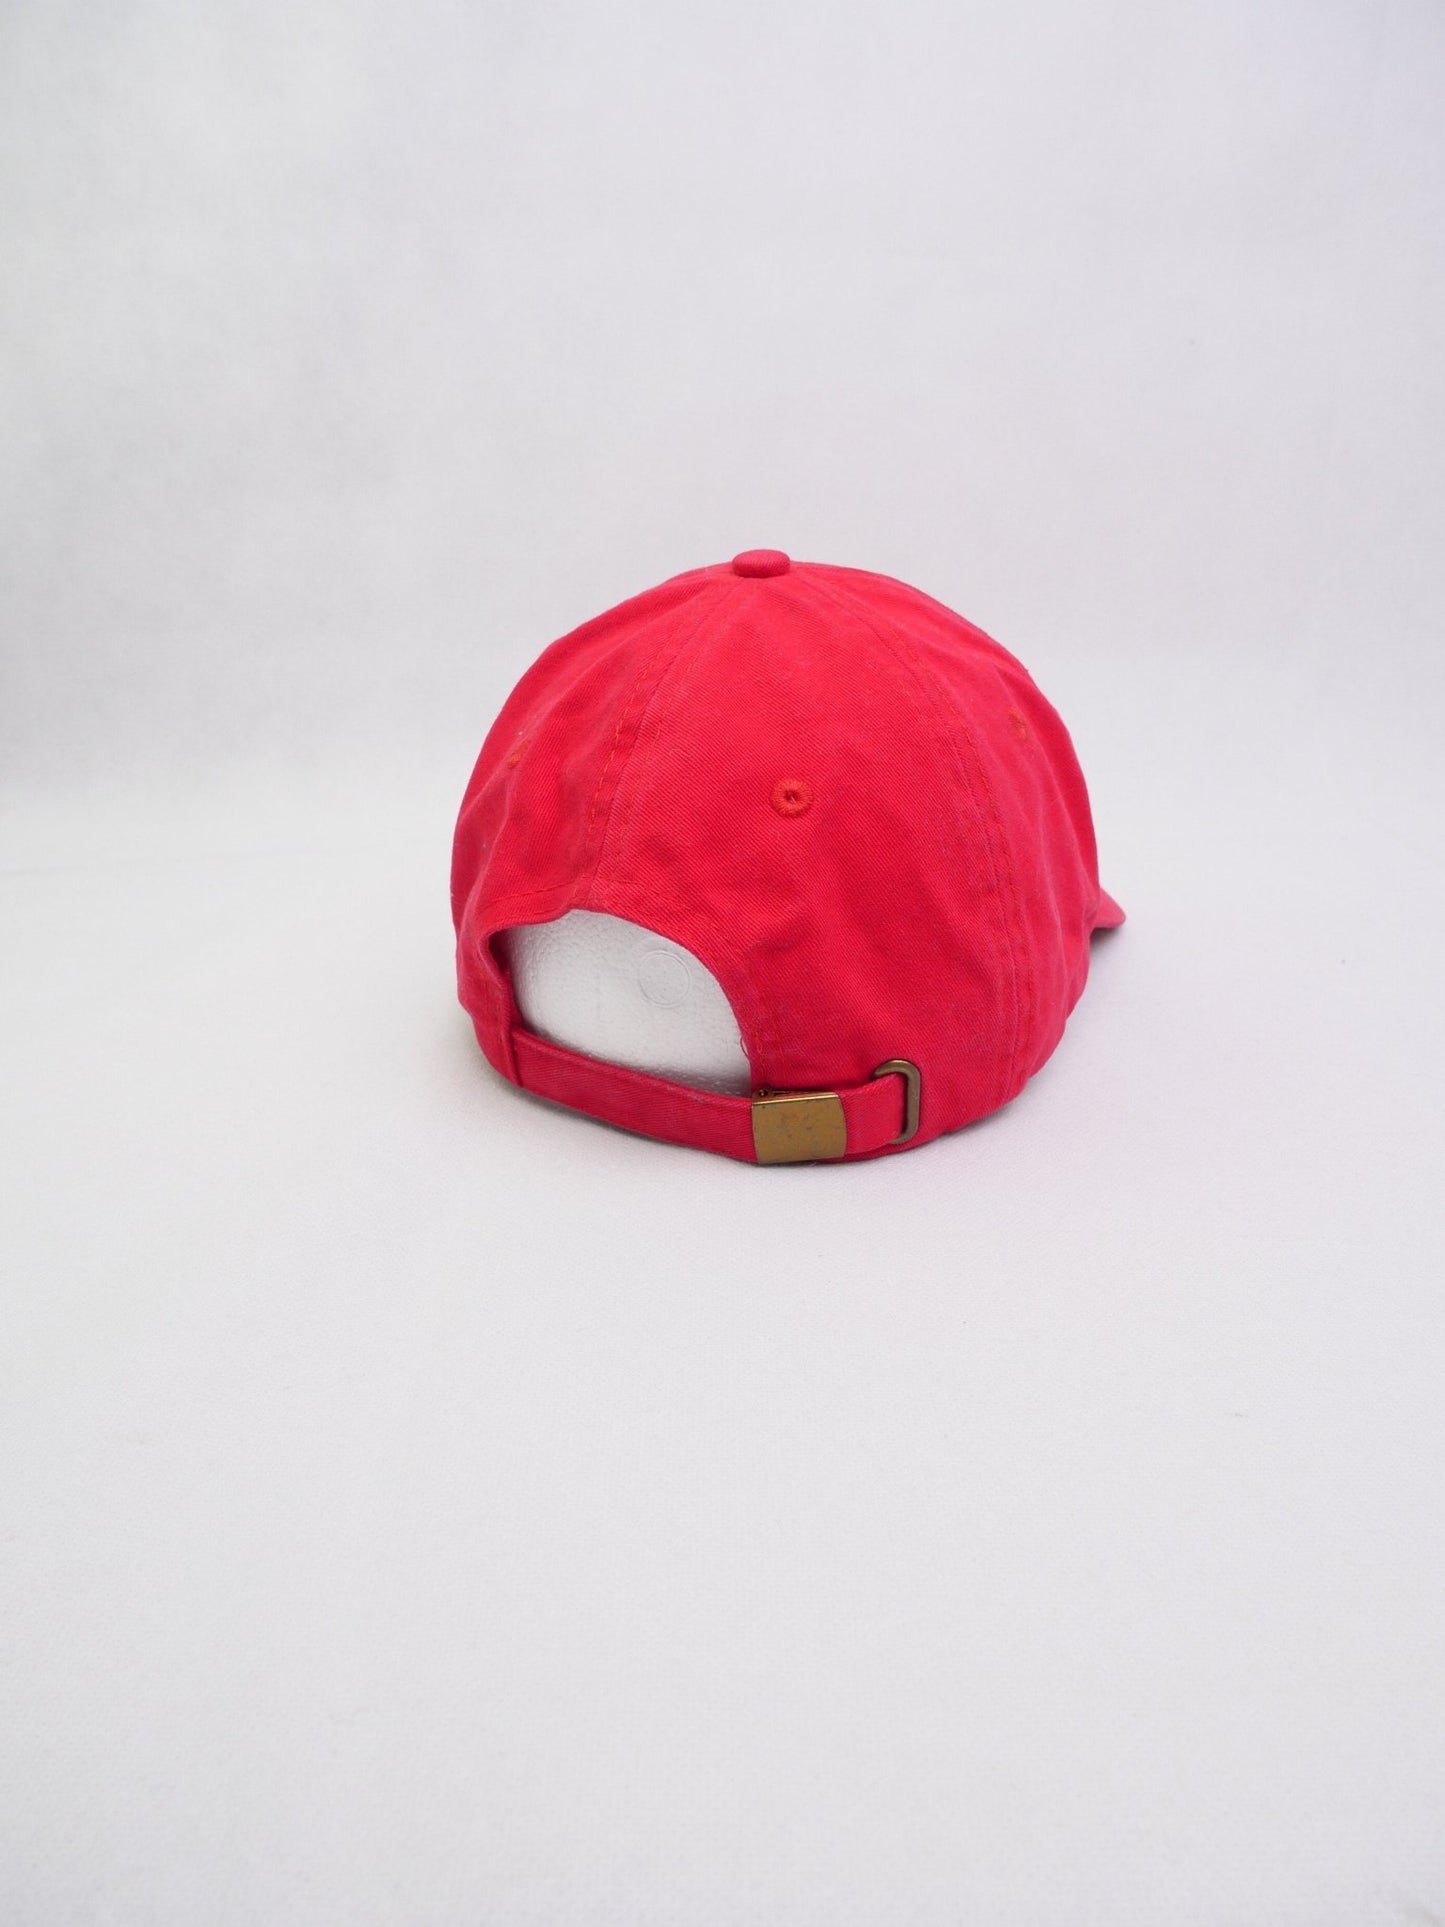 'Sheep' embroidered Logo red Cap Accessoire - Peeces